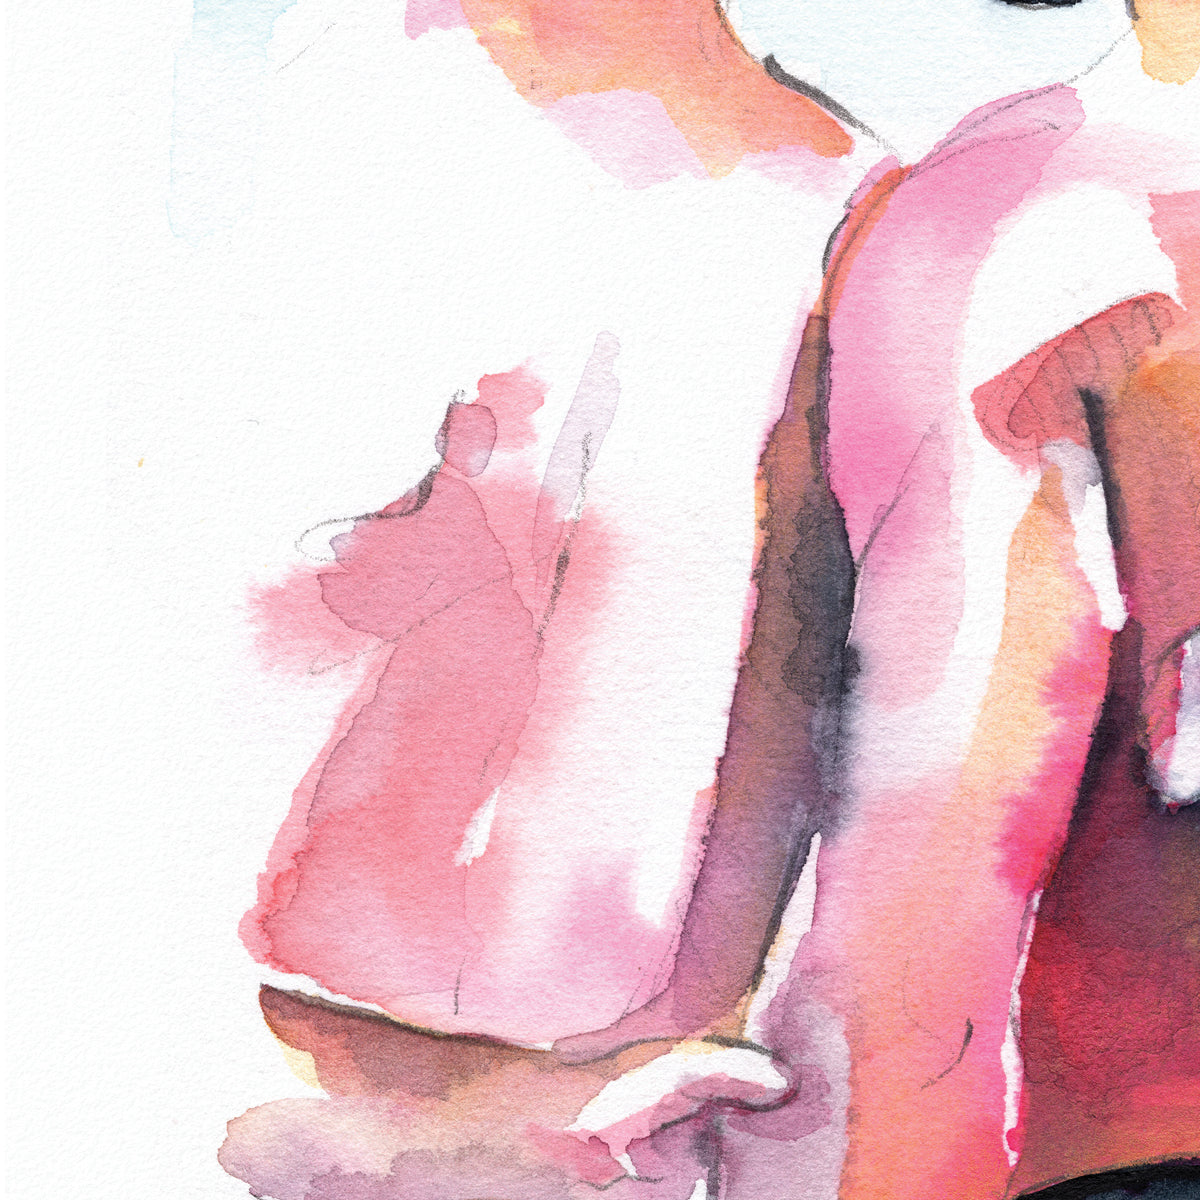 Tender Moment Between Male Lovers with Crimson Embrace - Giclee Art Print